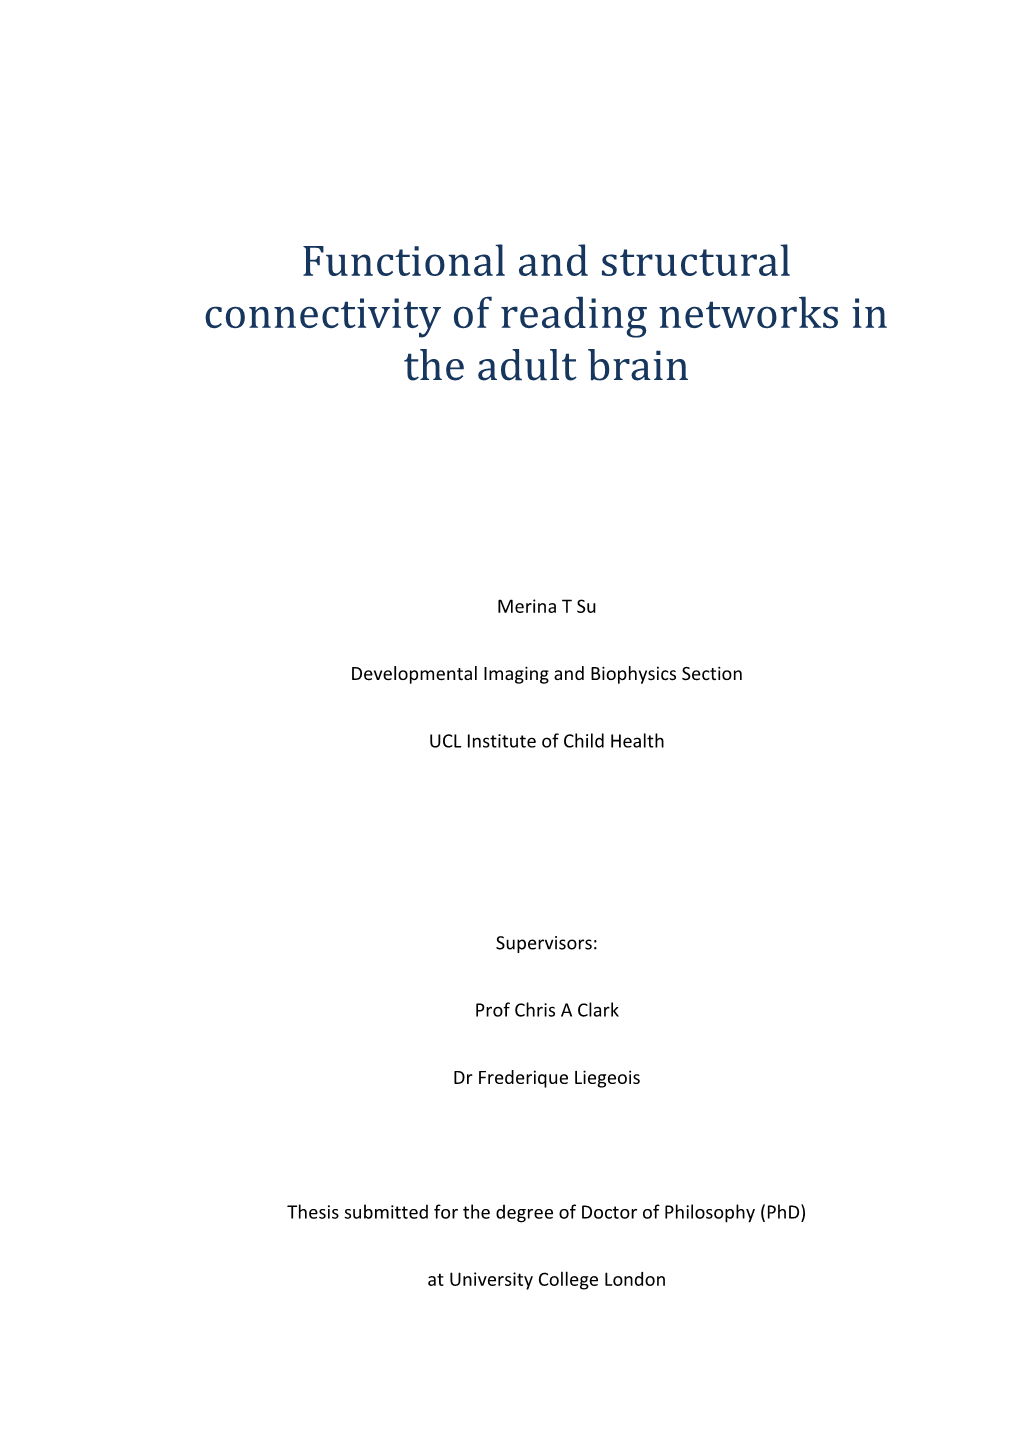 Functional and Structural Connectivity of Reading Networks in the Adult Brain